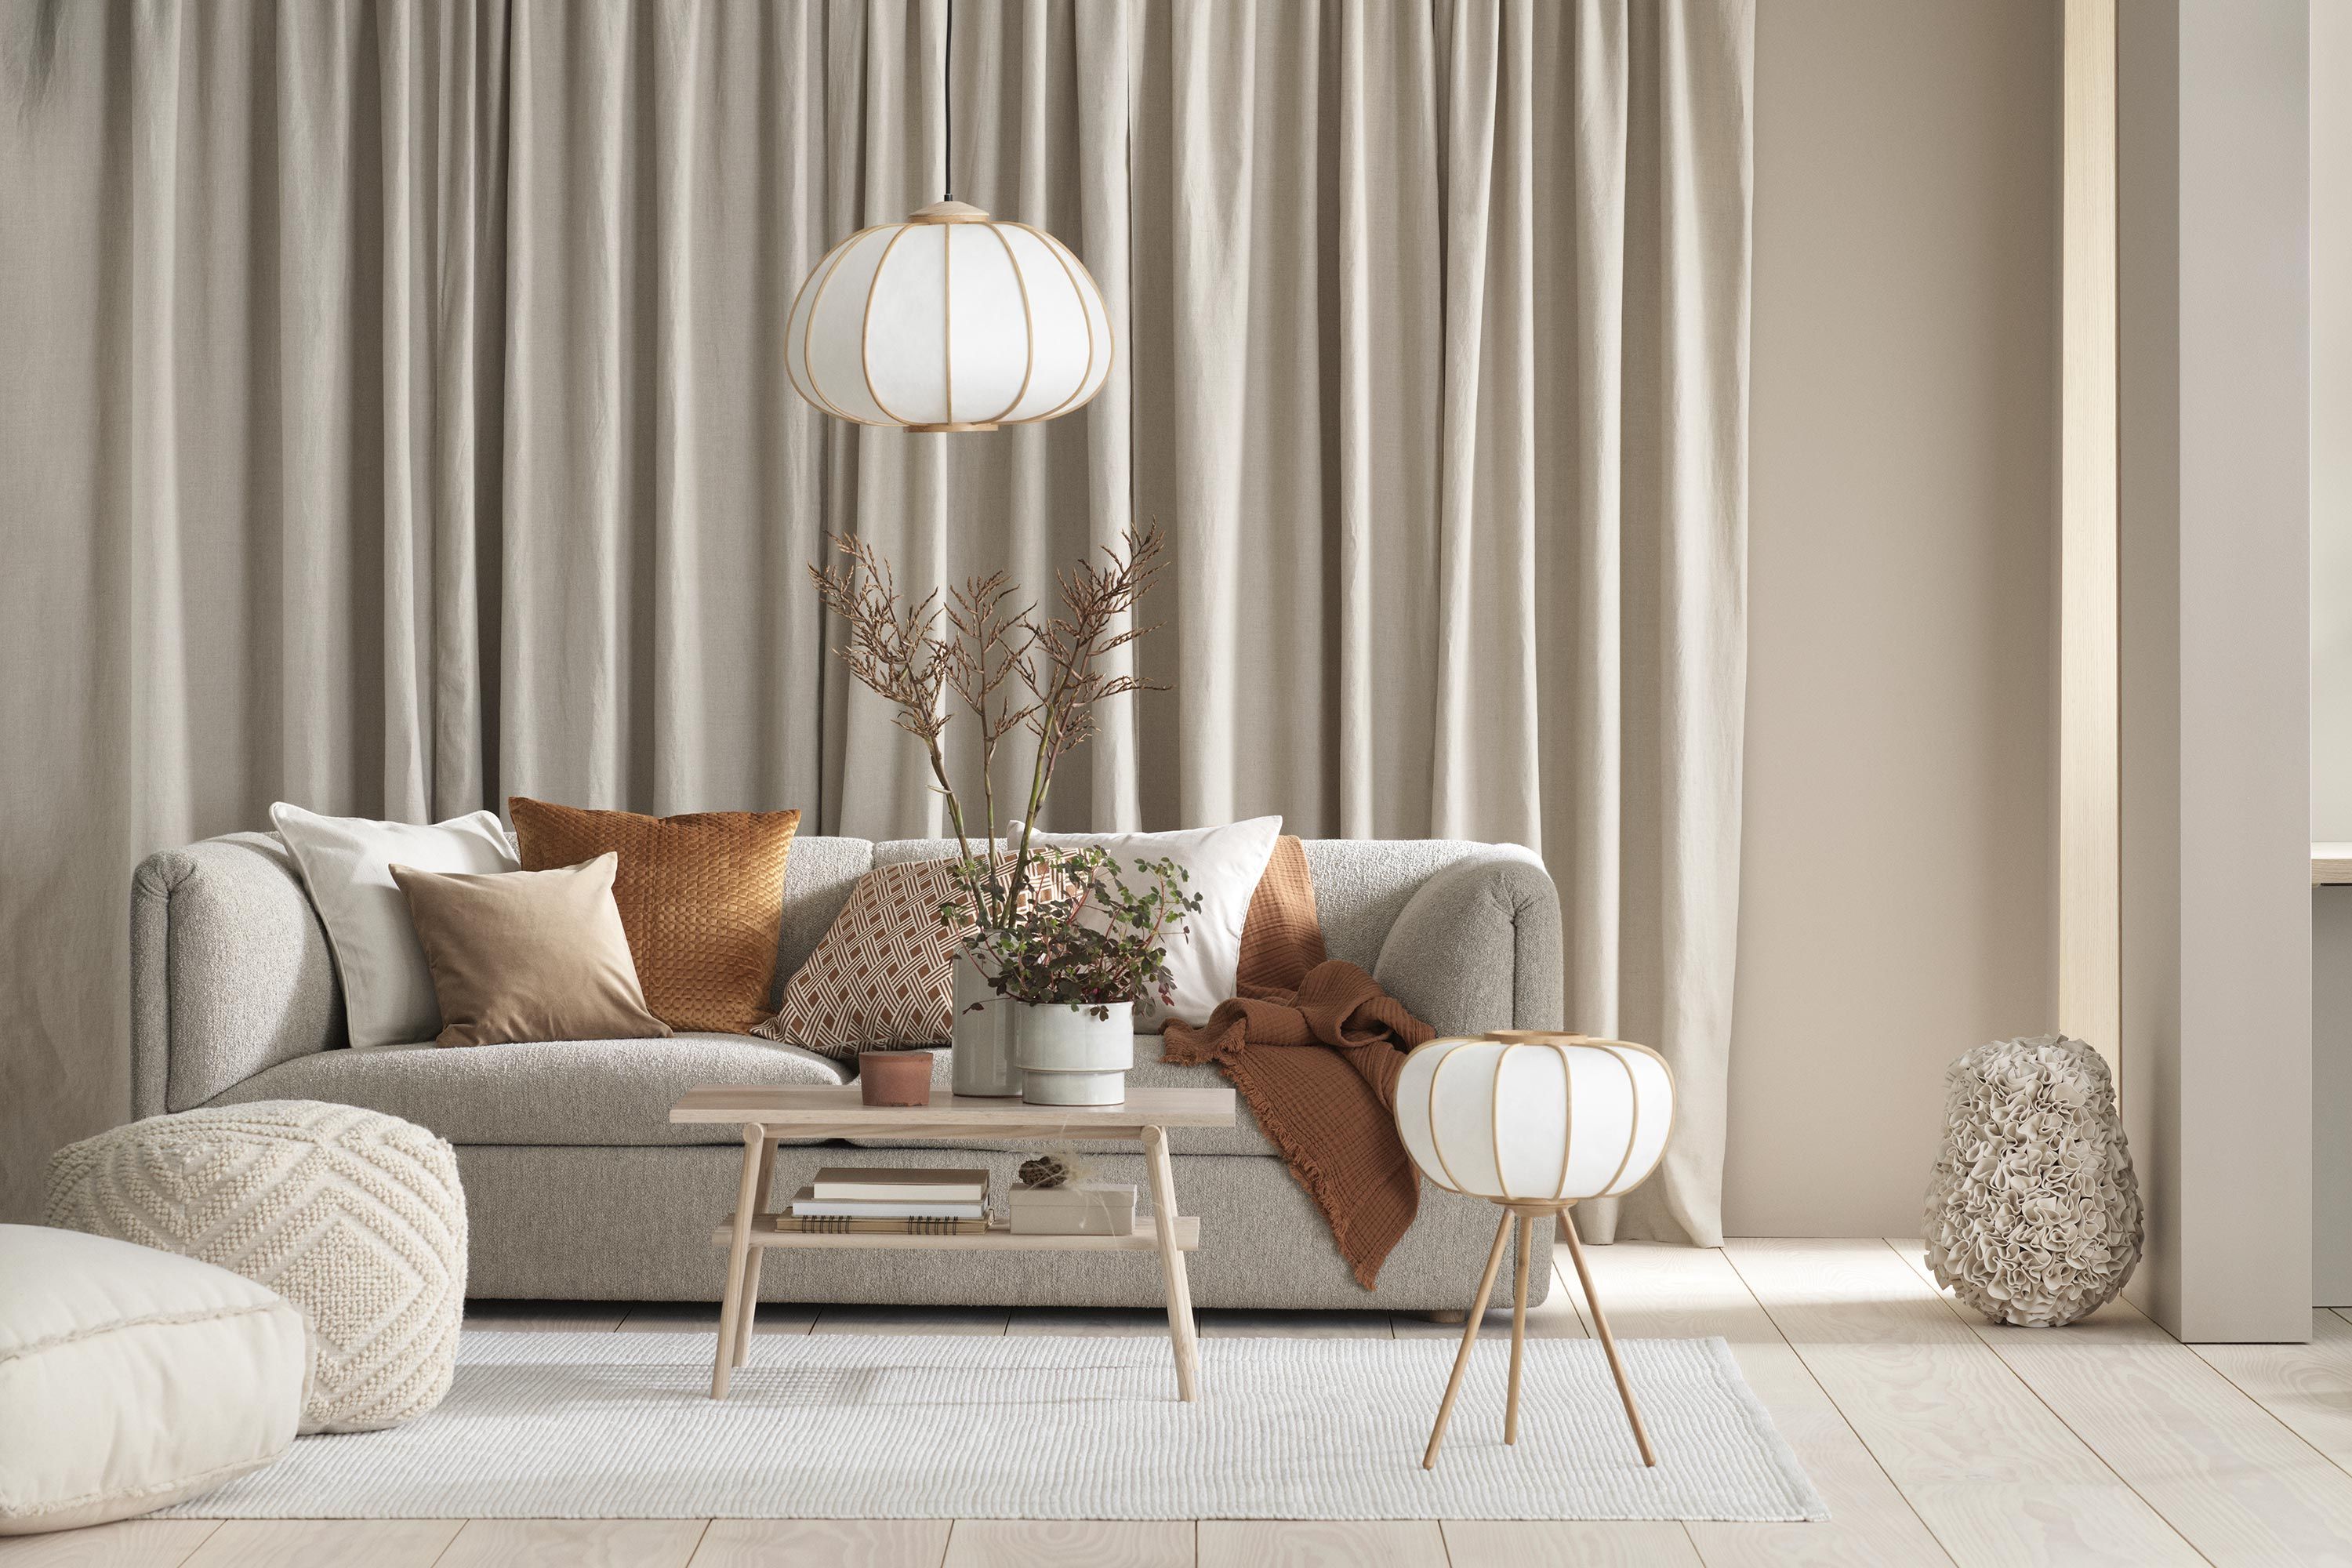 H&M has launched furniture and lighting as part of its homeware collection